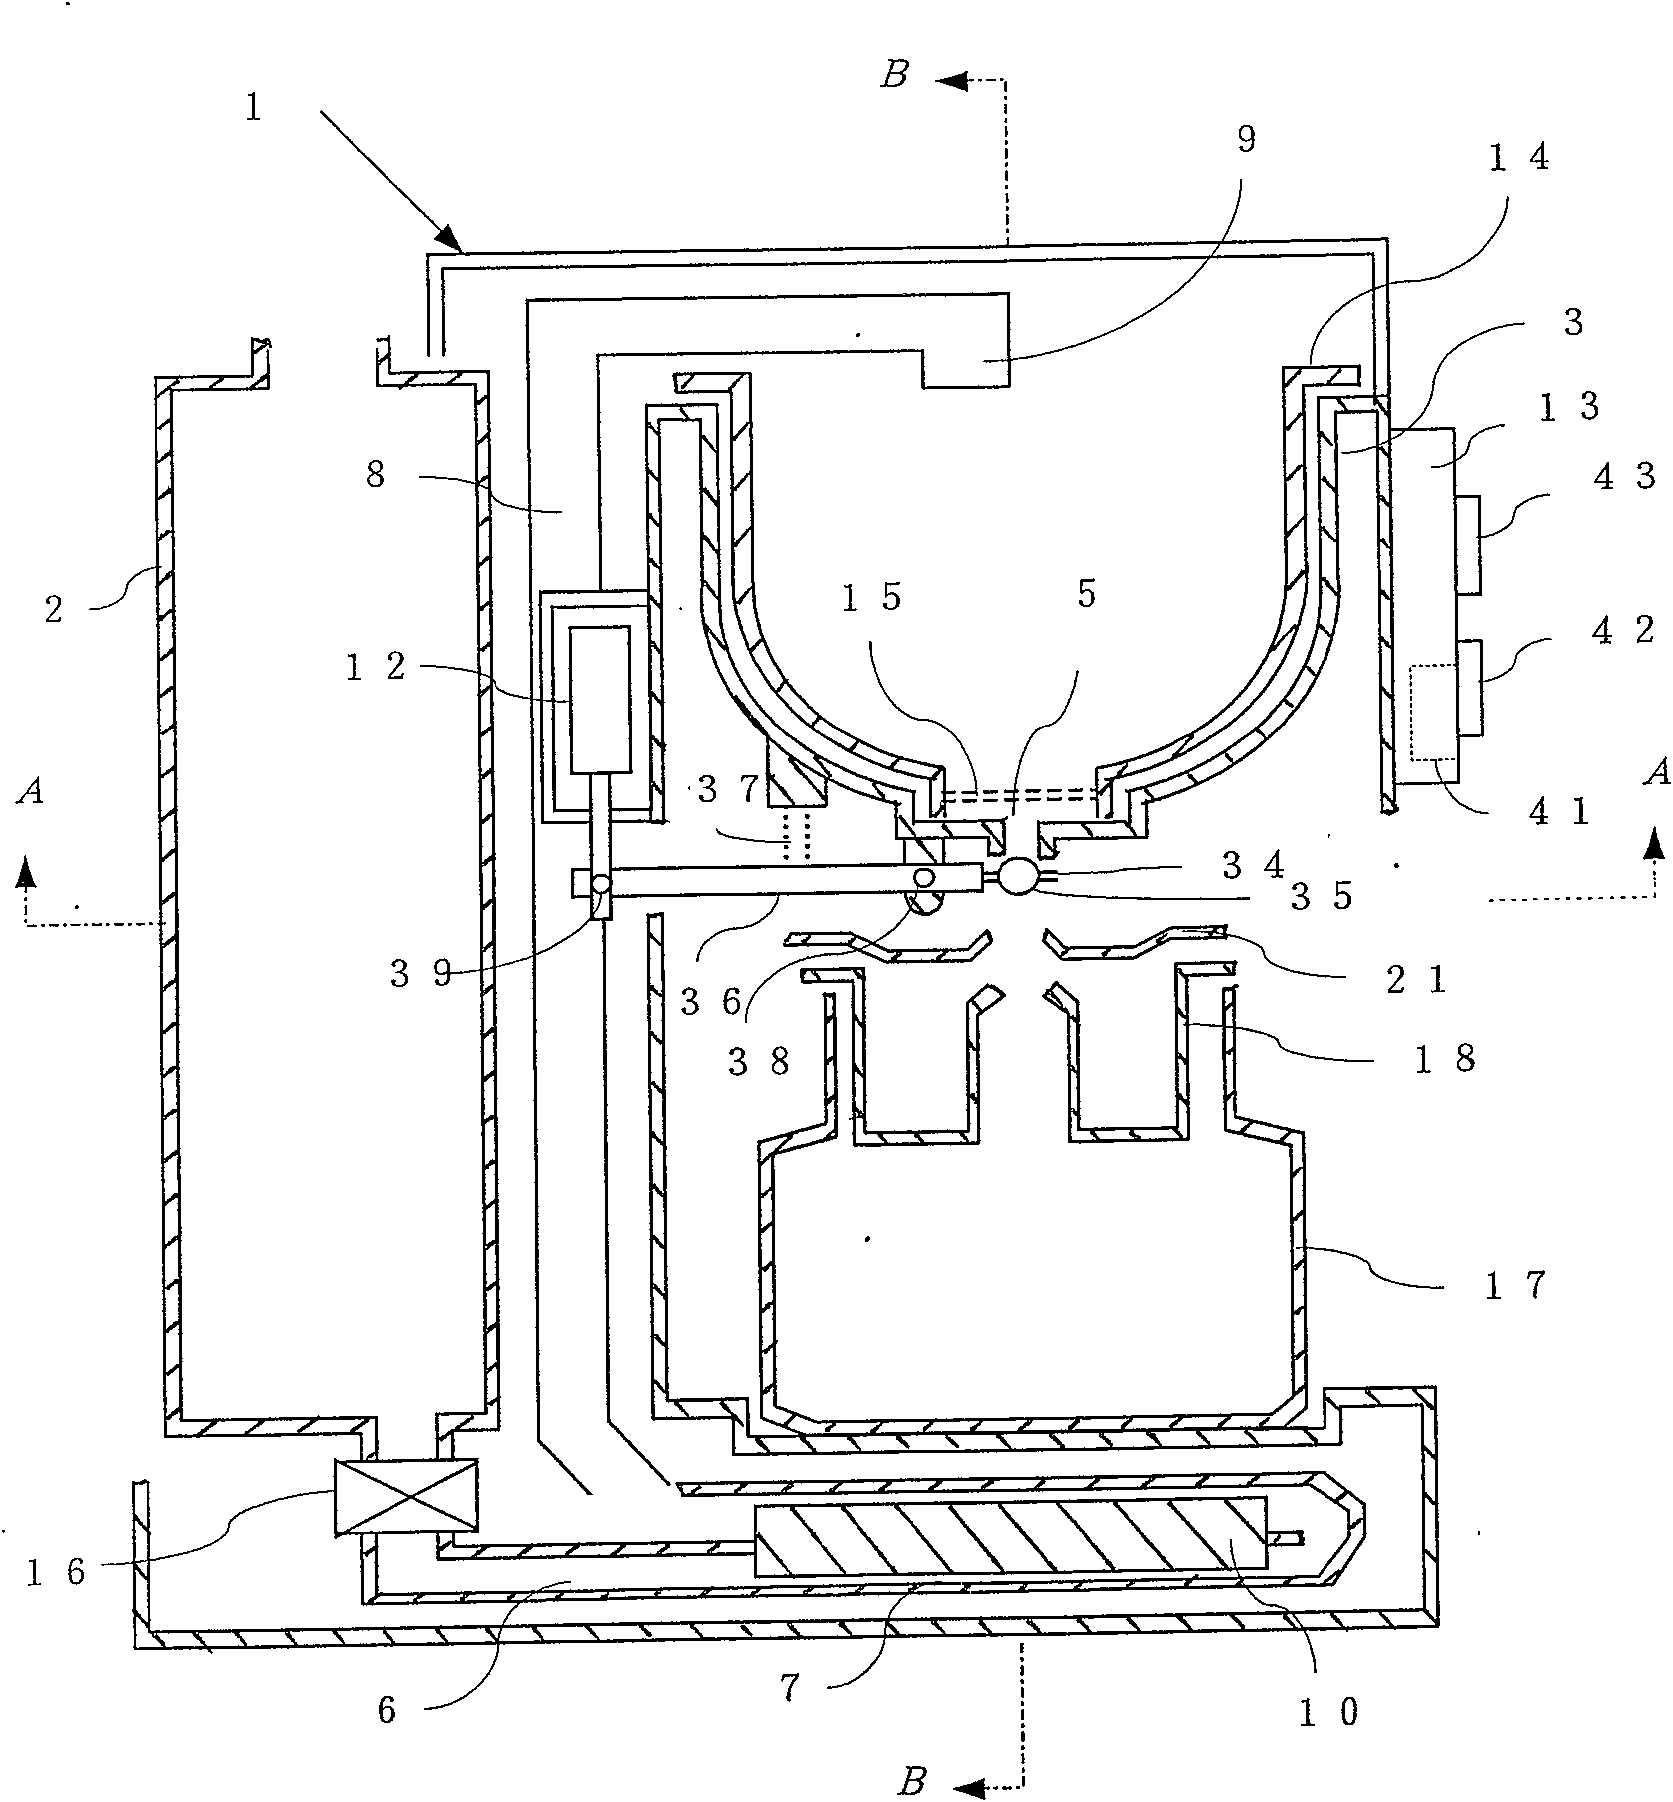 Beverage pouring and boiling device